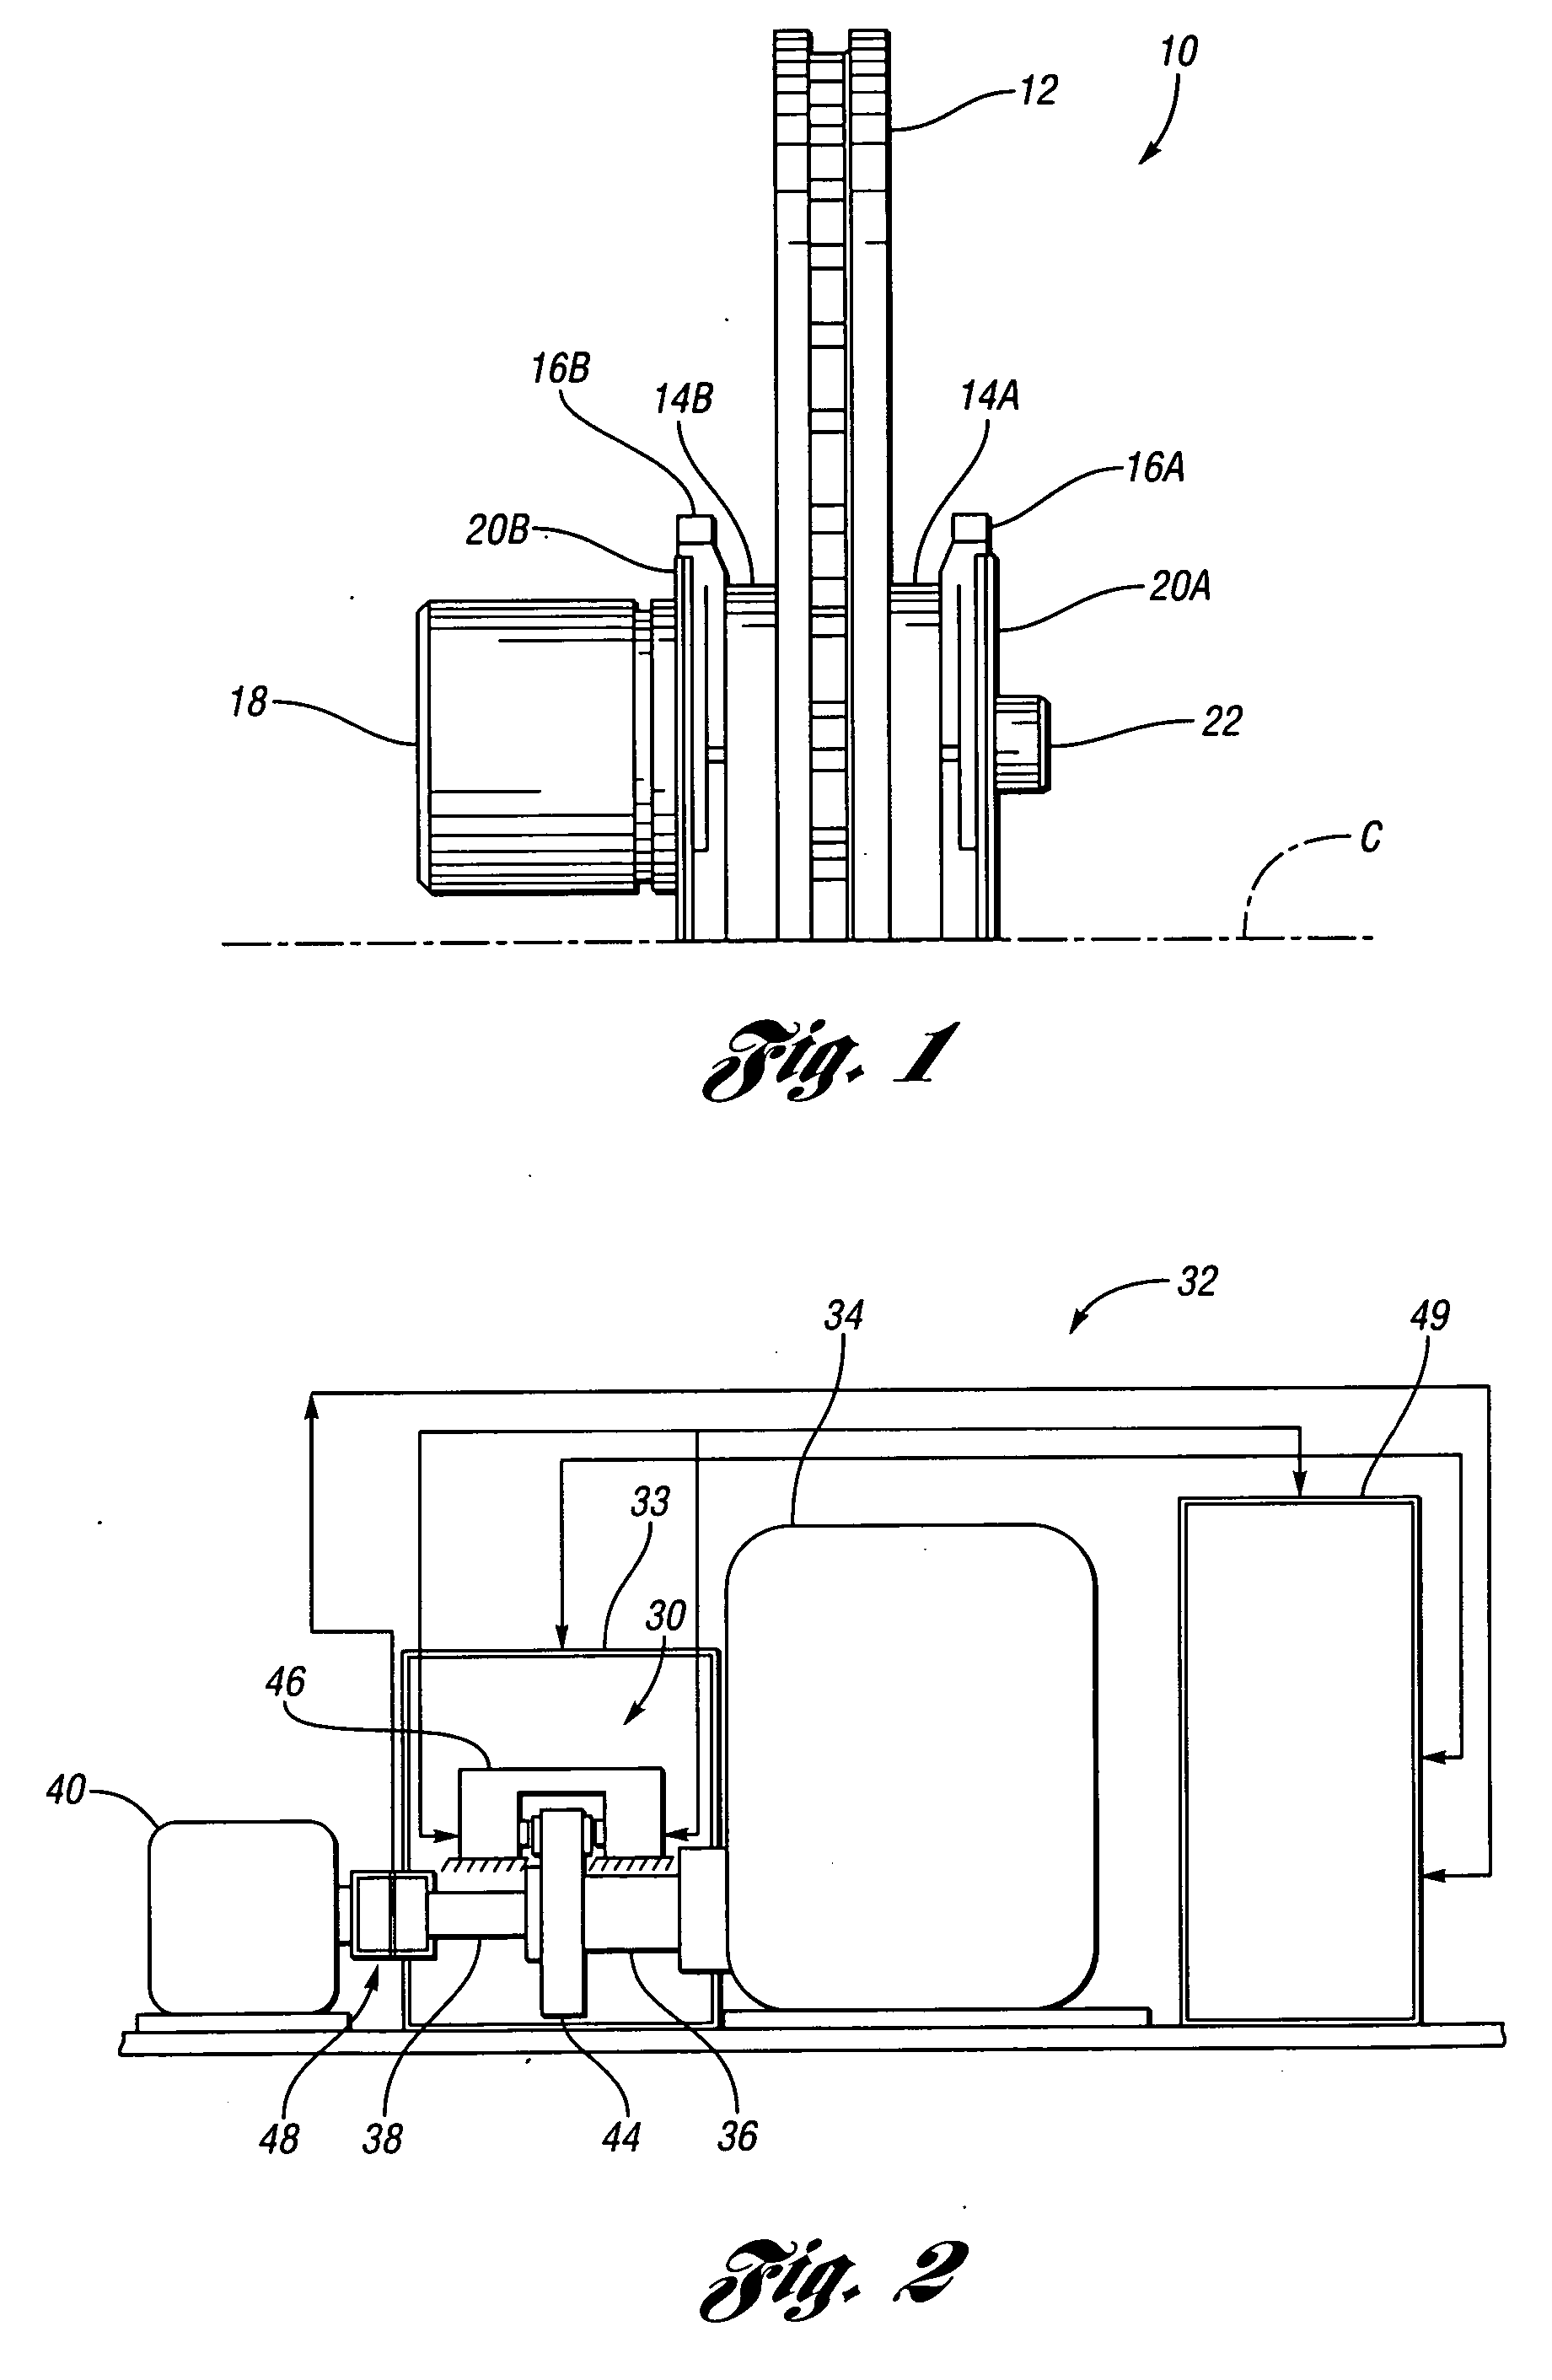 Test apparatus and method of measuring surface friction of a brake pad insulator material and method of use of a brake dynamometer